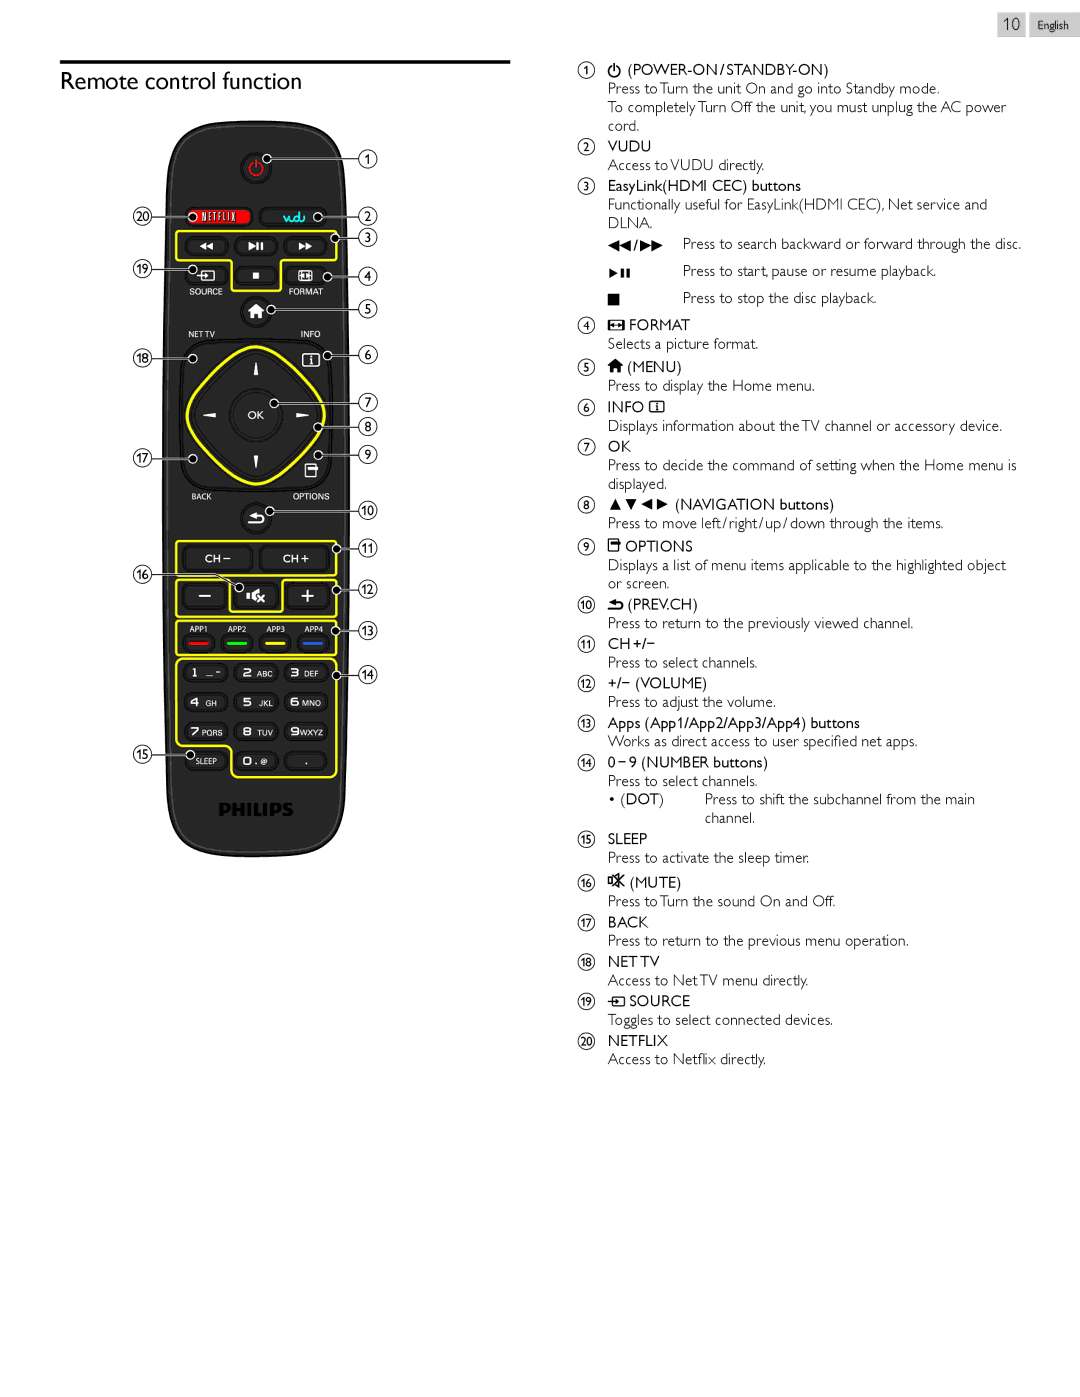 Philips 46PFL5907, 55PFL5907 user manual Remote control function, Format, Options, Prev.Ch, Source 